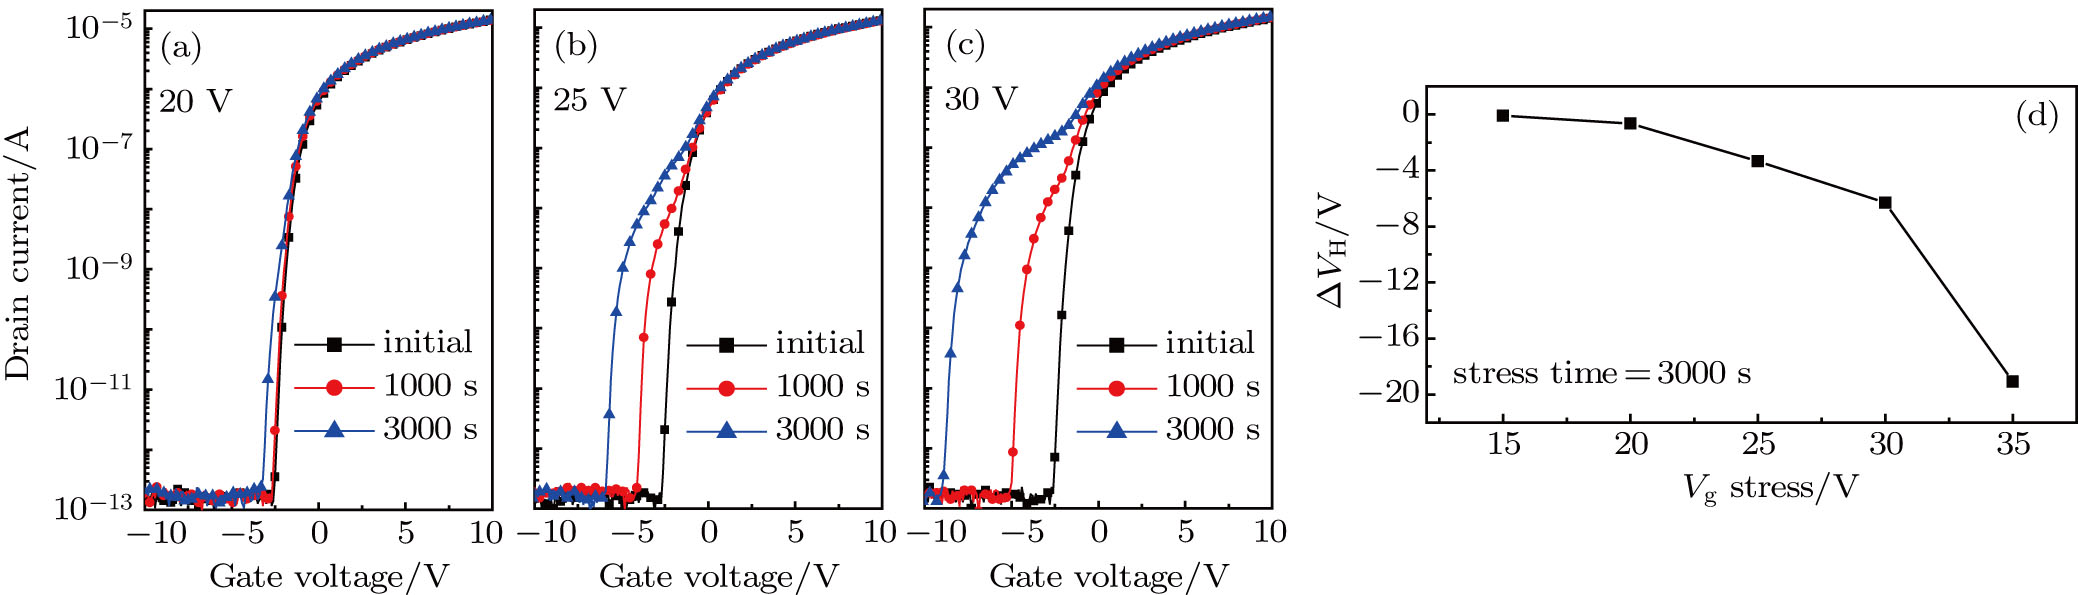 Positive Gate Bias Stress Induced Hump Effect In Elevated Metal Metal Oxide Thin Film Transistors Xref Rid Cpb 26 12 fn1 Ref Type Fn Xref Fn Id Cpb 26 12 fn1 Label Label P Project Supported By The Science And Technology